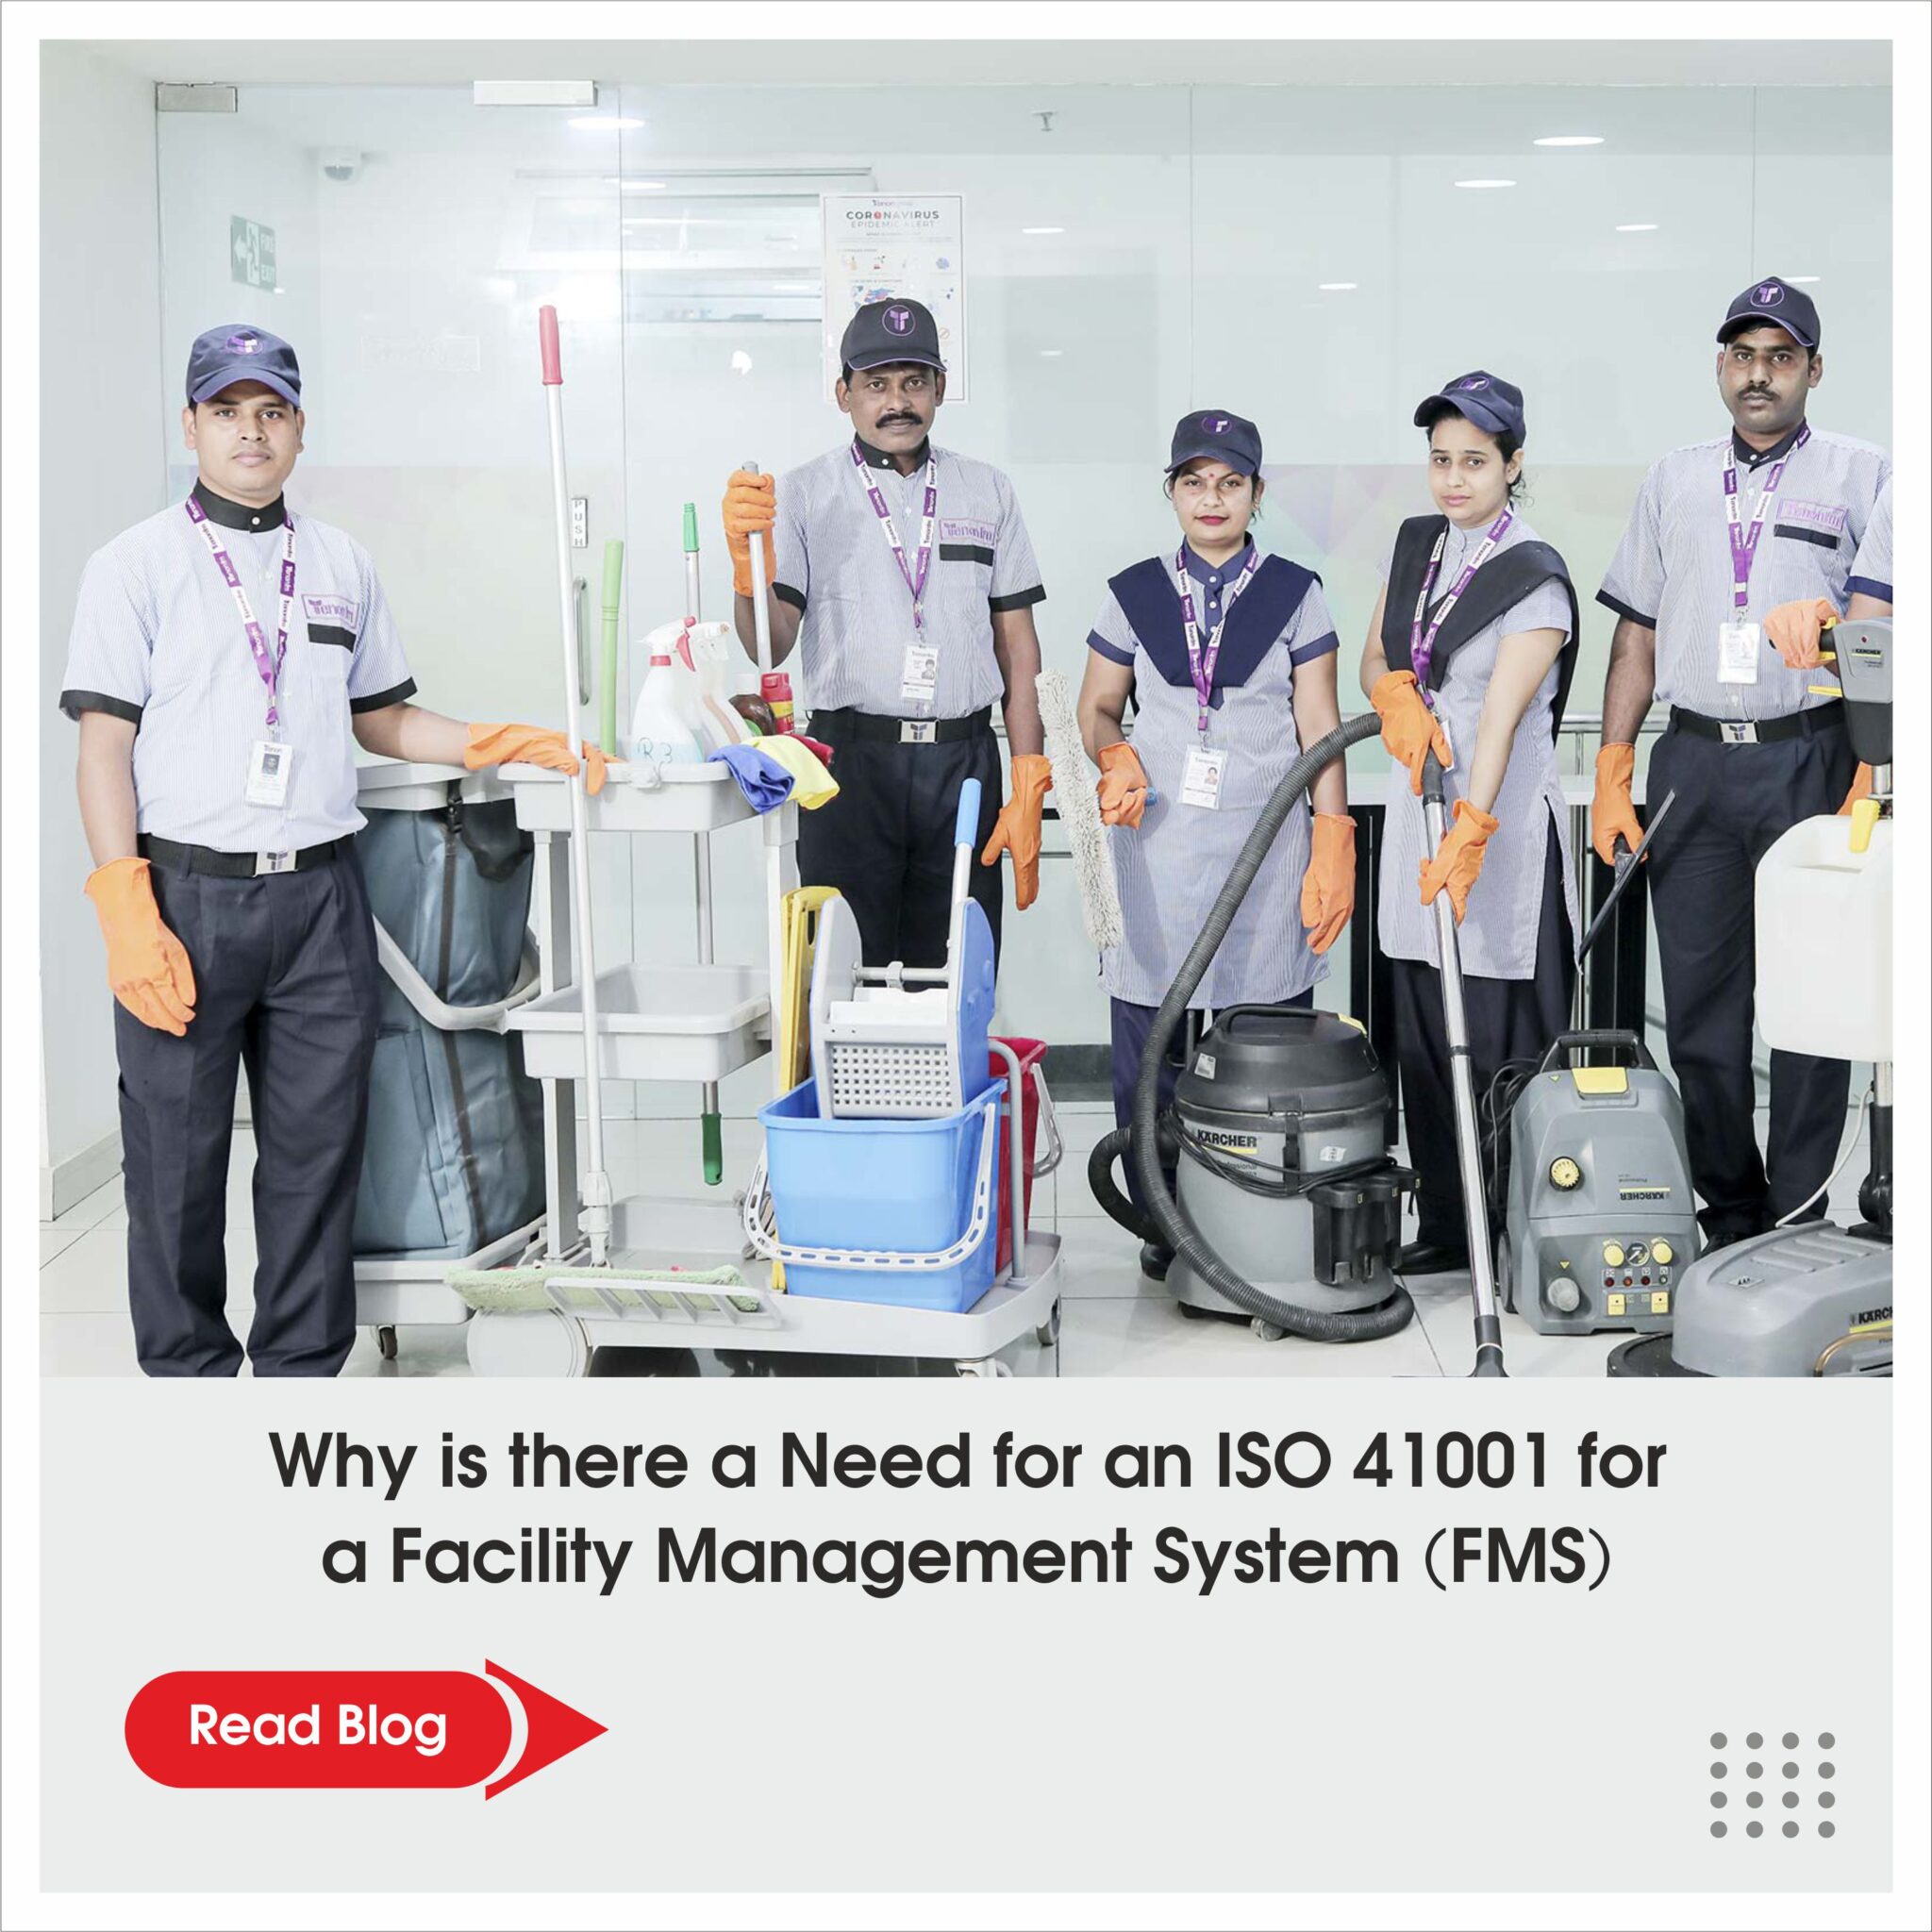 Why is there a Need for an ISO 41001 for a Facility Management System (FMS)?